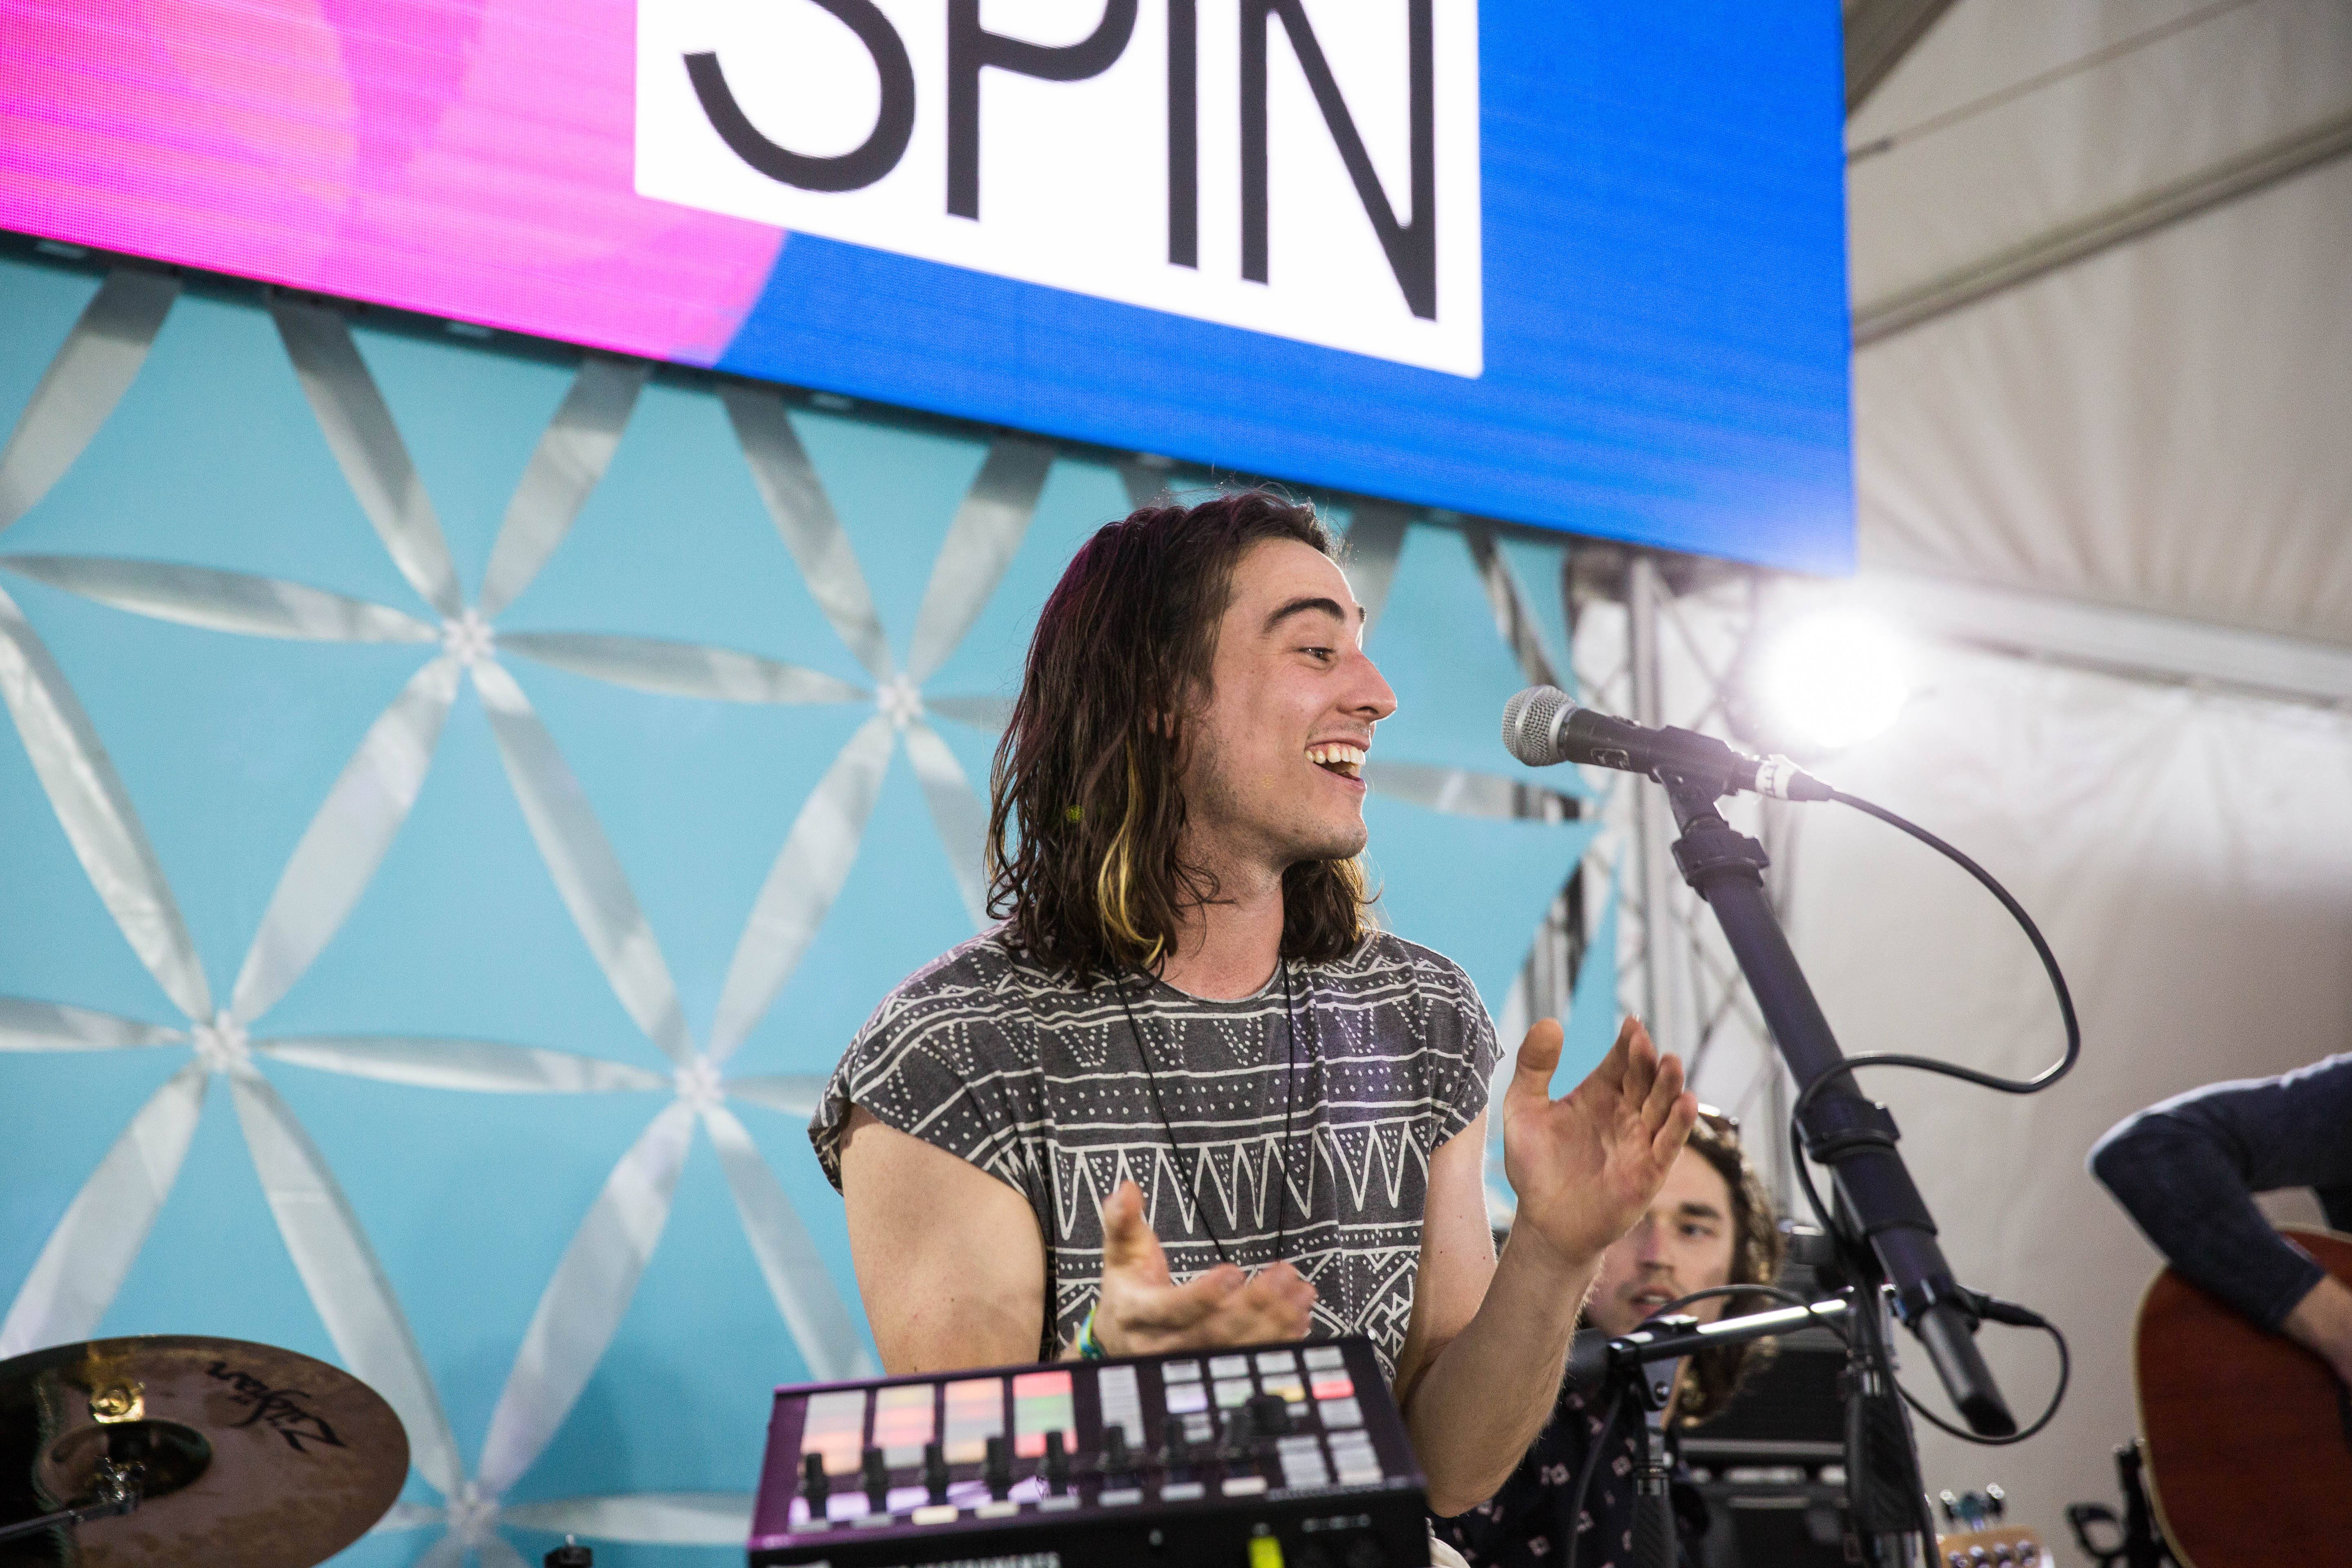 SPIN at Firefly 2016: Day 1 at Toyota Music Den with the Wombats, Saint Motel, and More